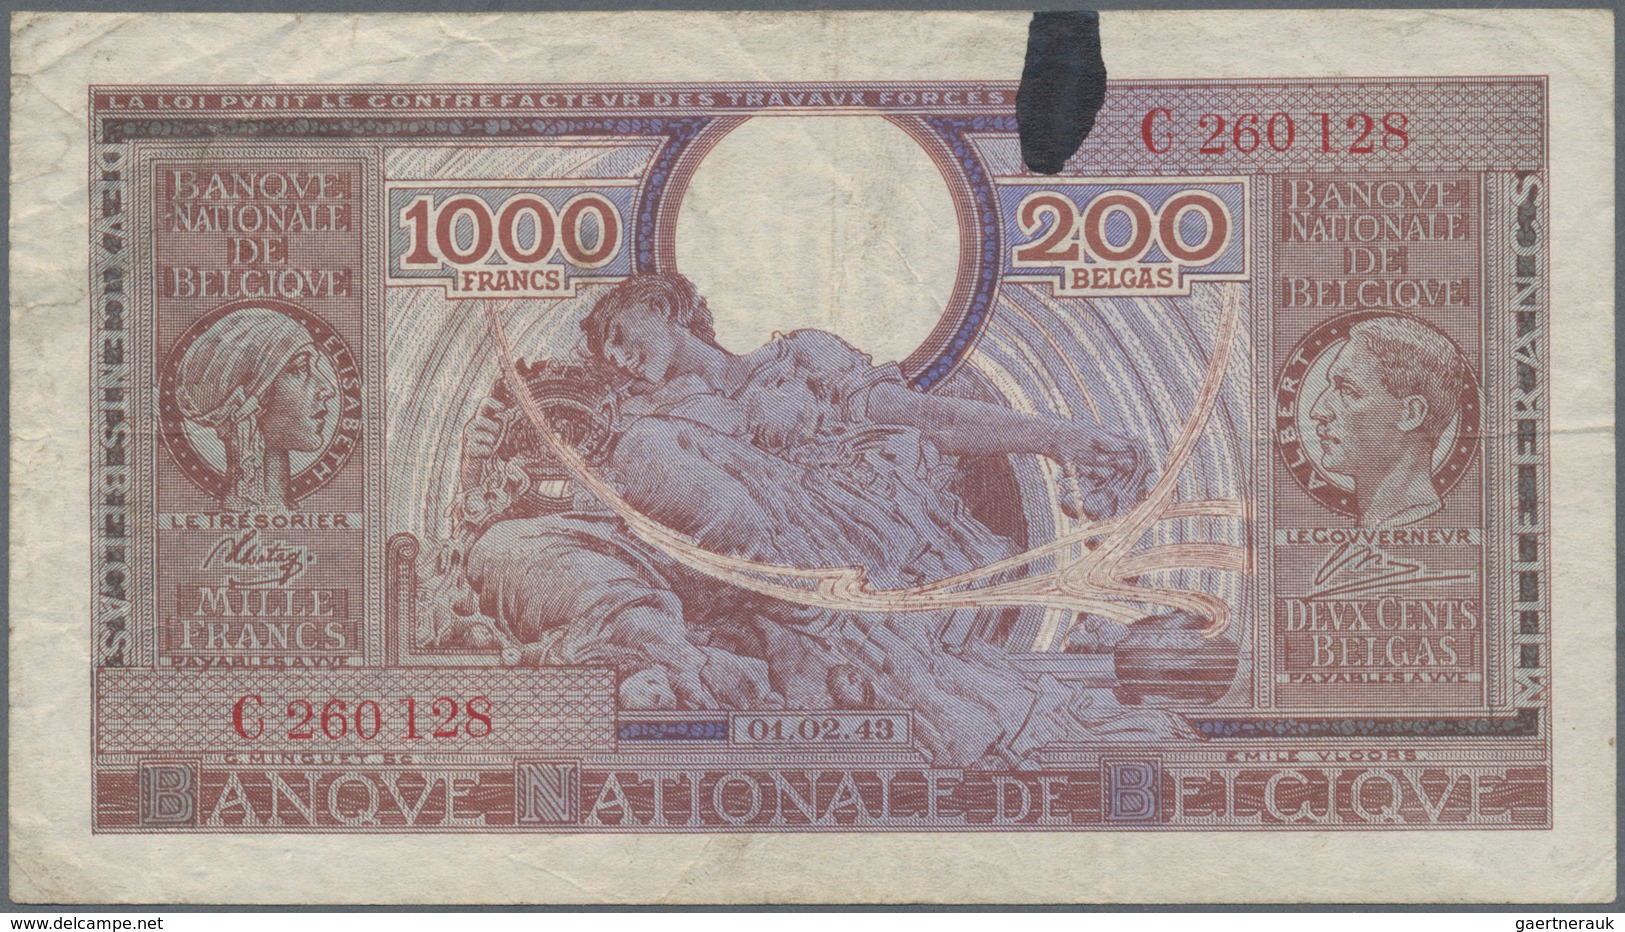 01128 Belgium / Belgien: 1000 Francs = 200 Belgas 1943 P. 125, Used With Folds And Creases, An Ink Stain A - [ 1] …-1830 : Before Independence